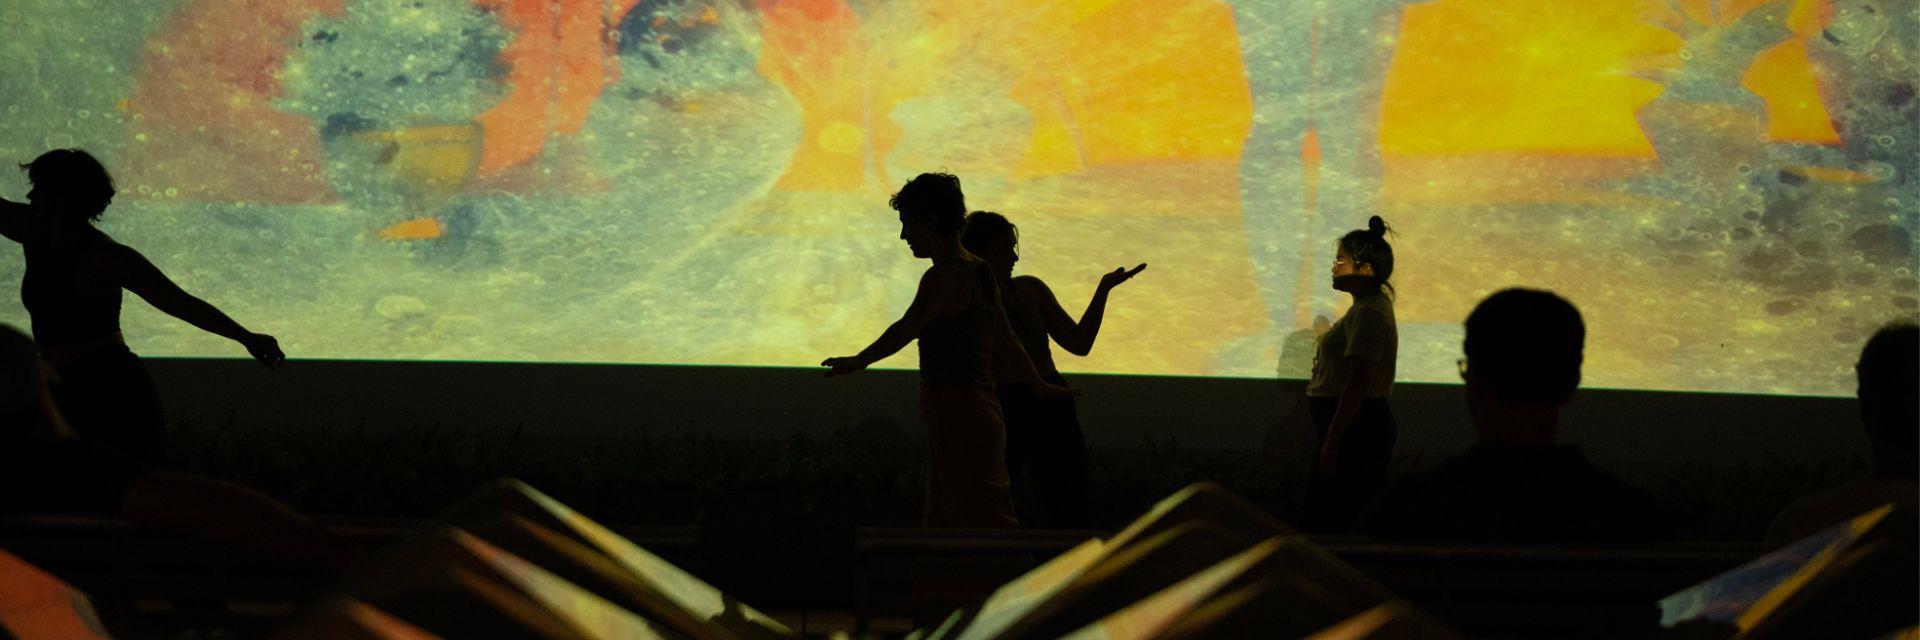 People dance in front a colorful screen.